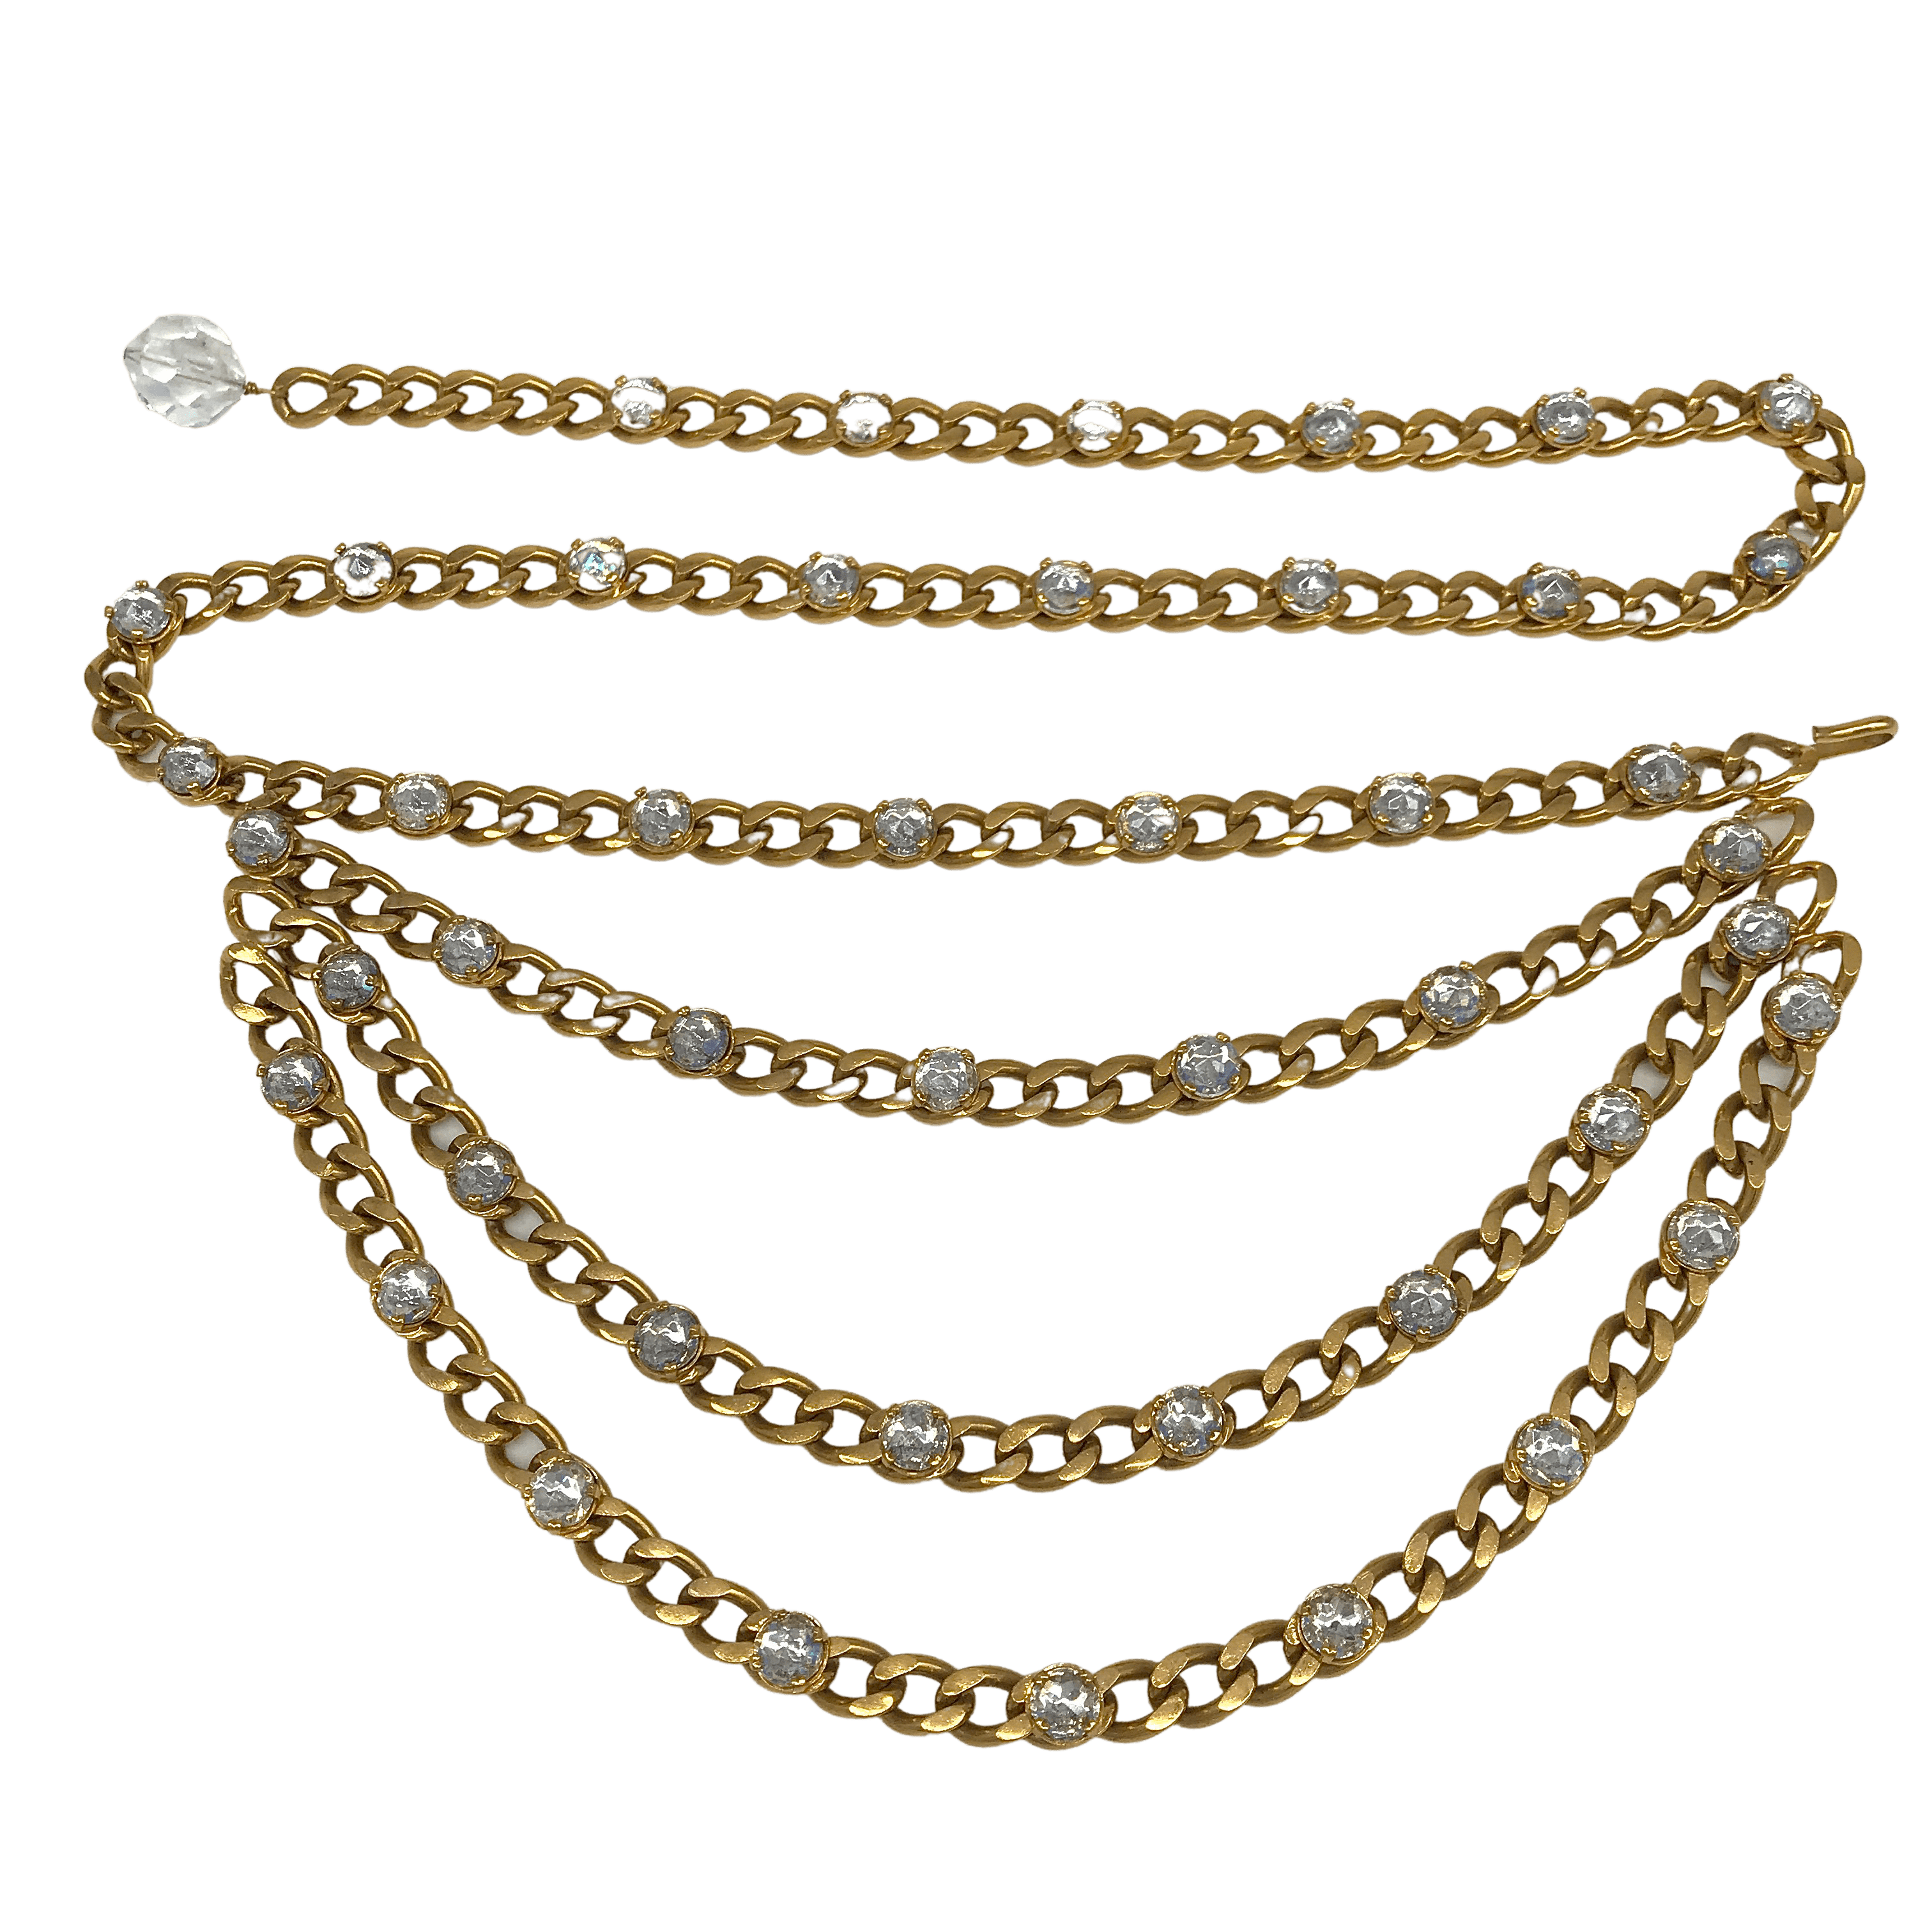 Vintage Chanel Rhinestone Chain Belt (COLLECTIBLE) – Clothes